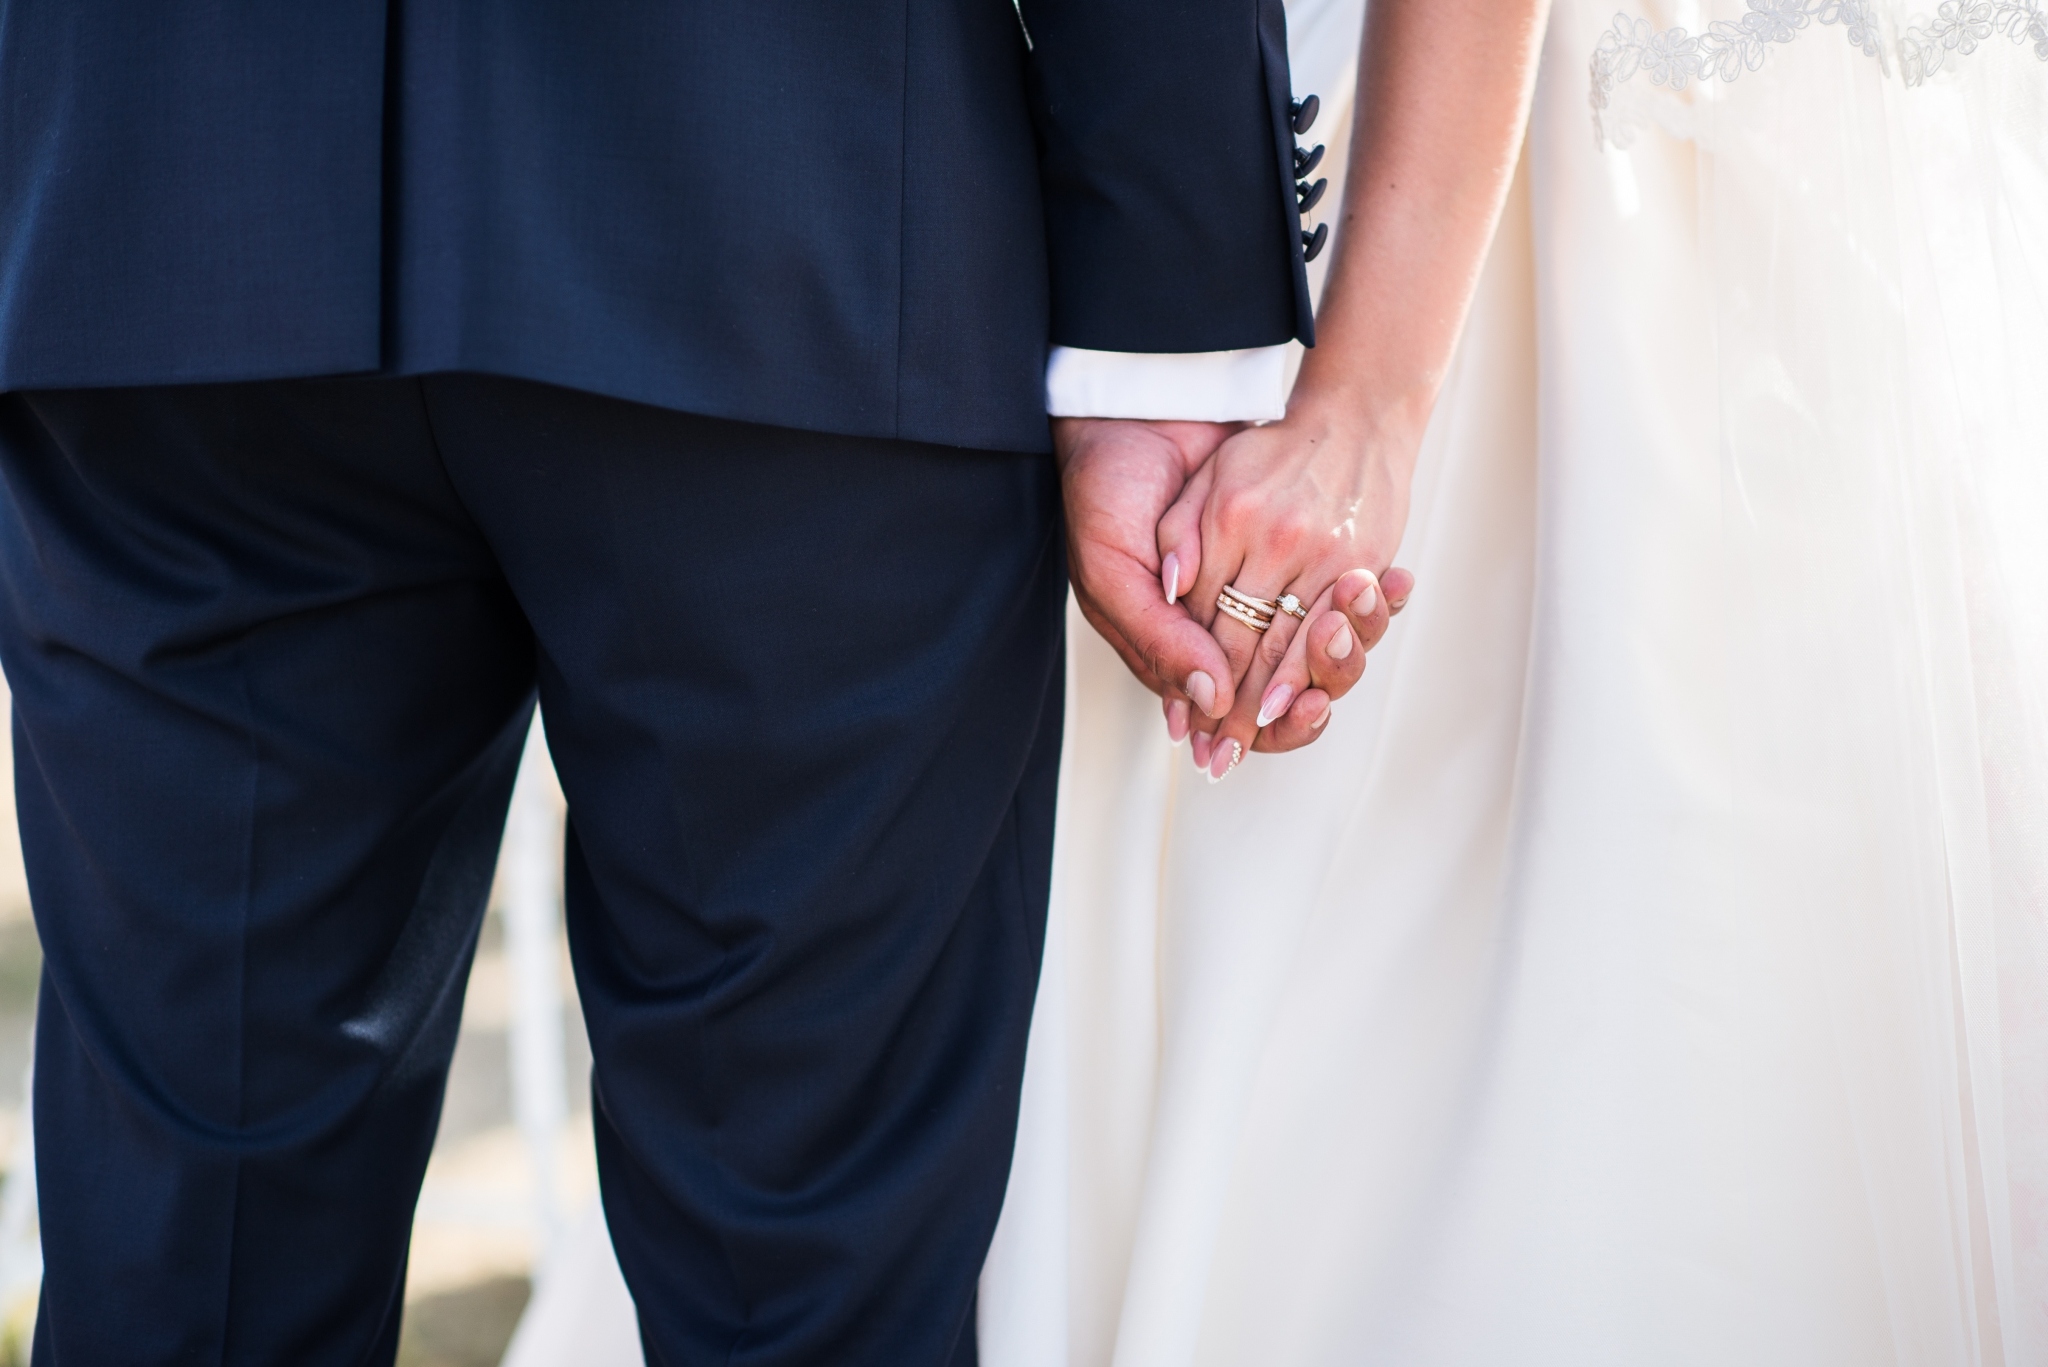 A couple holding hands on their wedding day and wearing wedding rings.